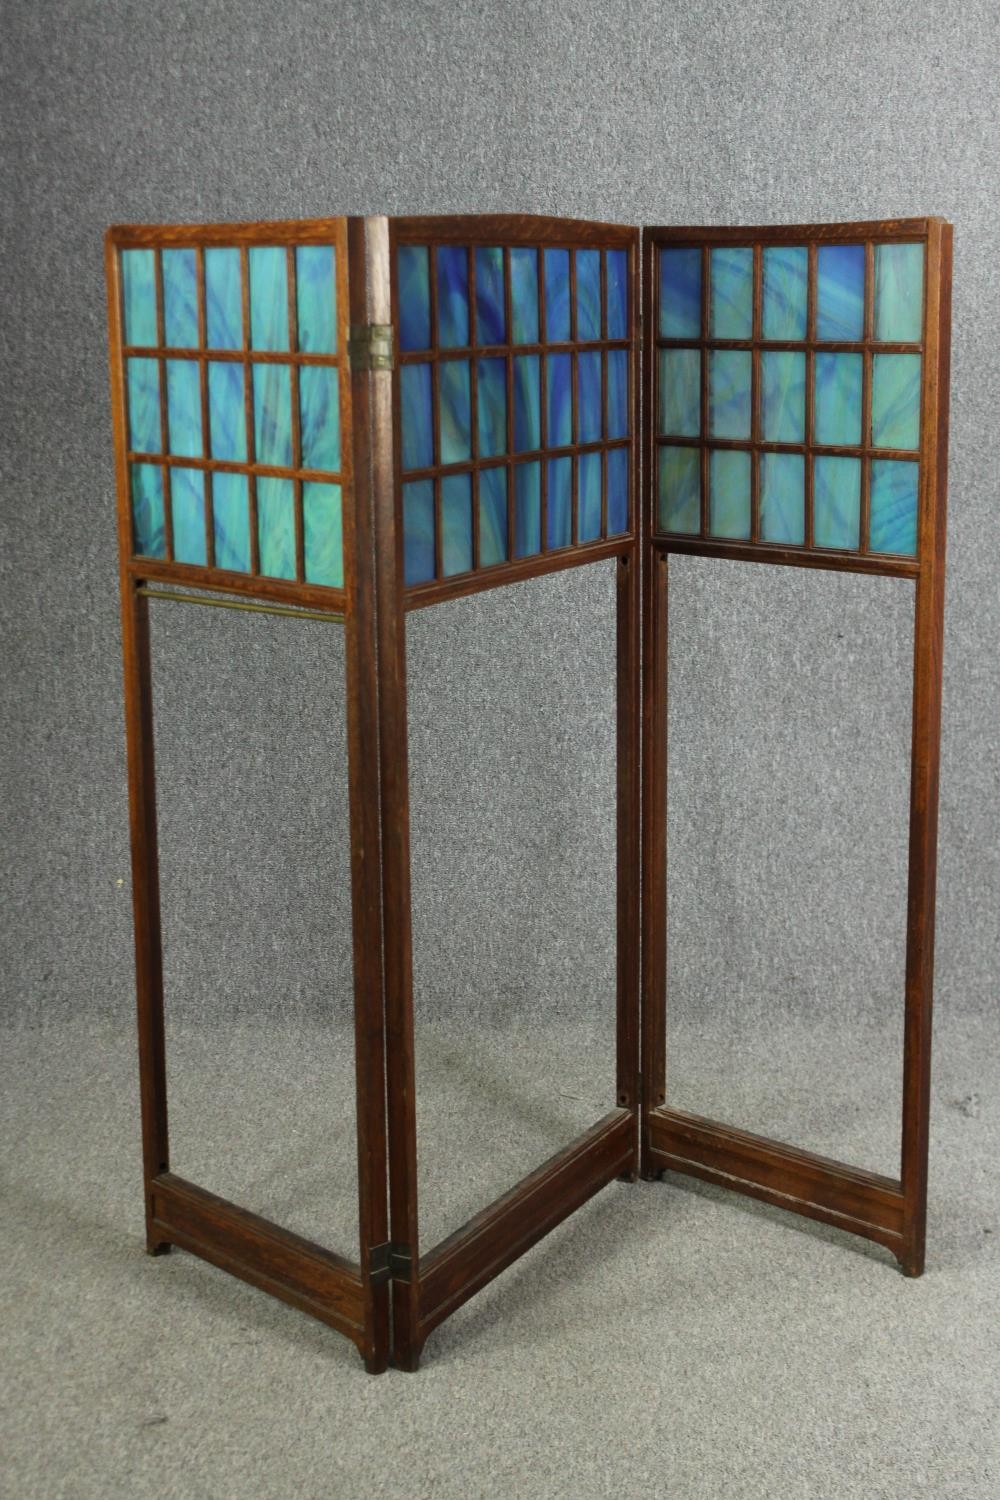 An oak and glass panelled Arts and Crafts folding room divider, early 20th century. H.141 W.160cm. - Image 2 of 4